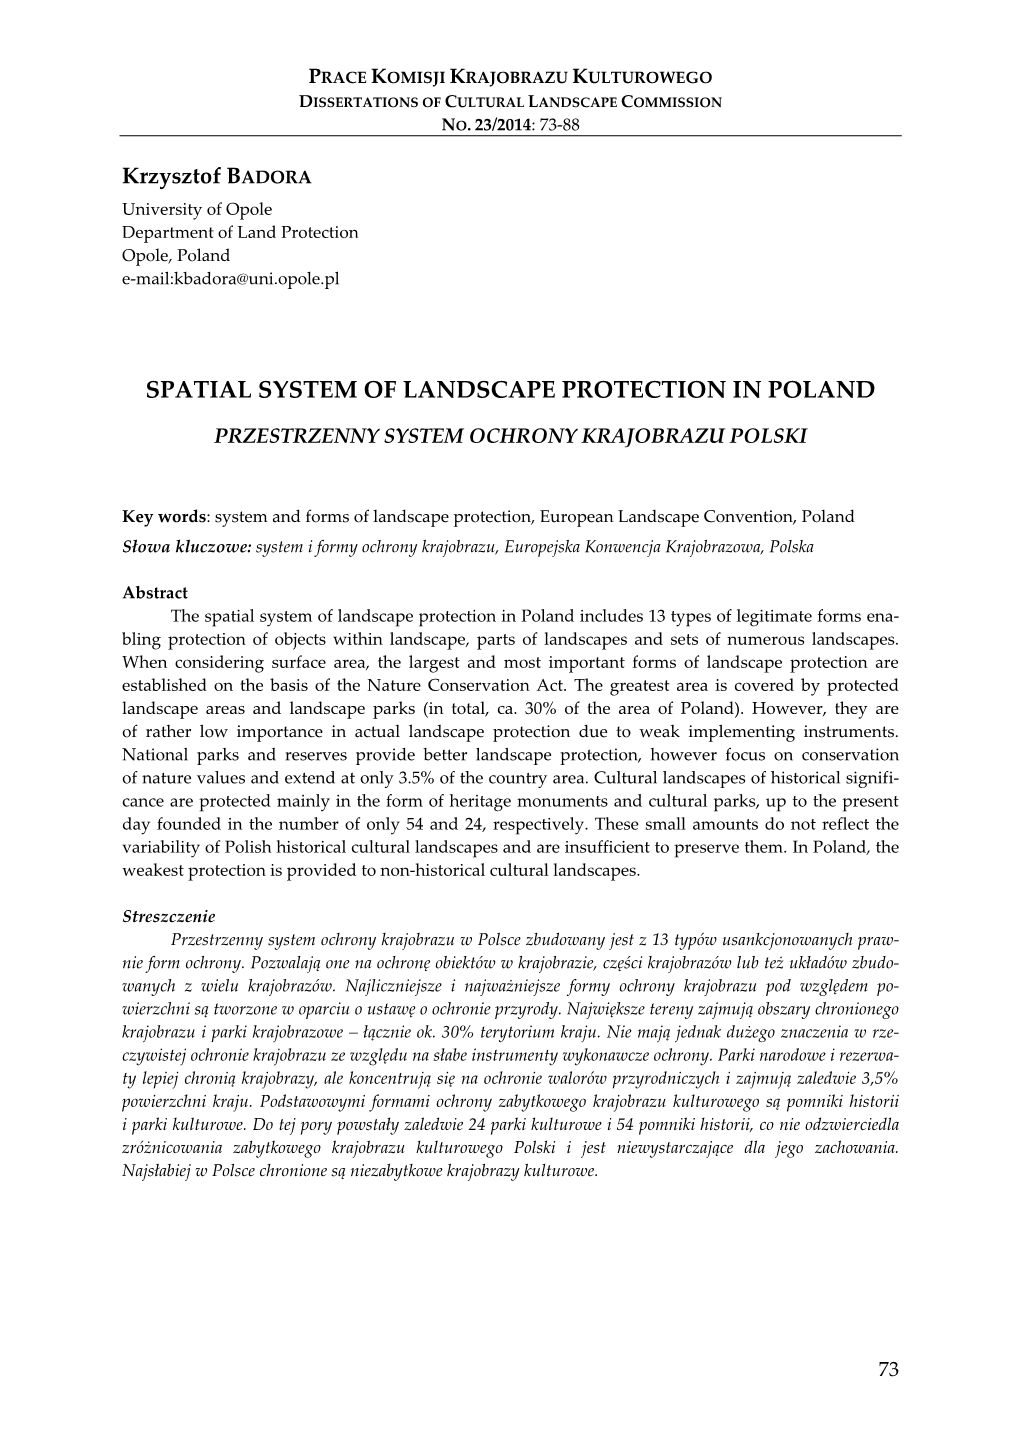 Spatial System of Landscape Protection in Poland